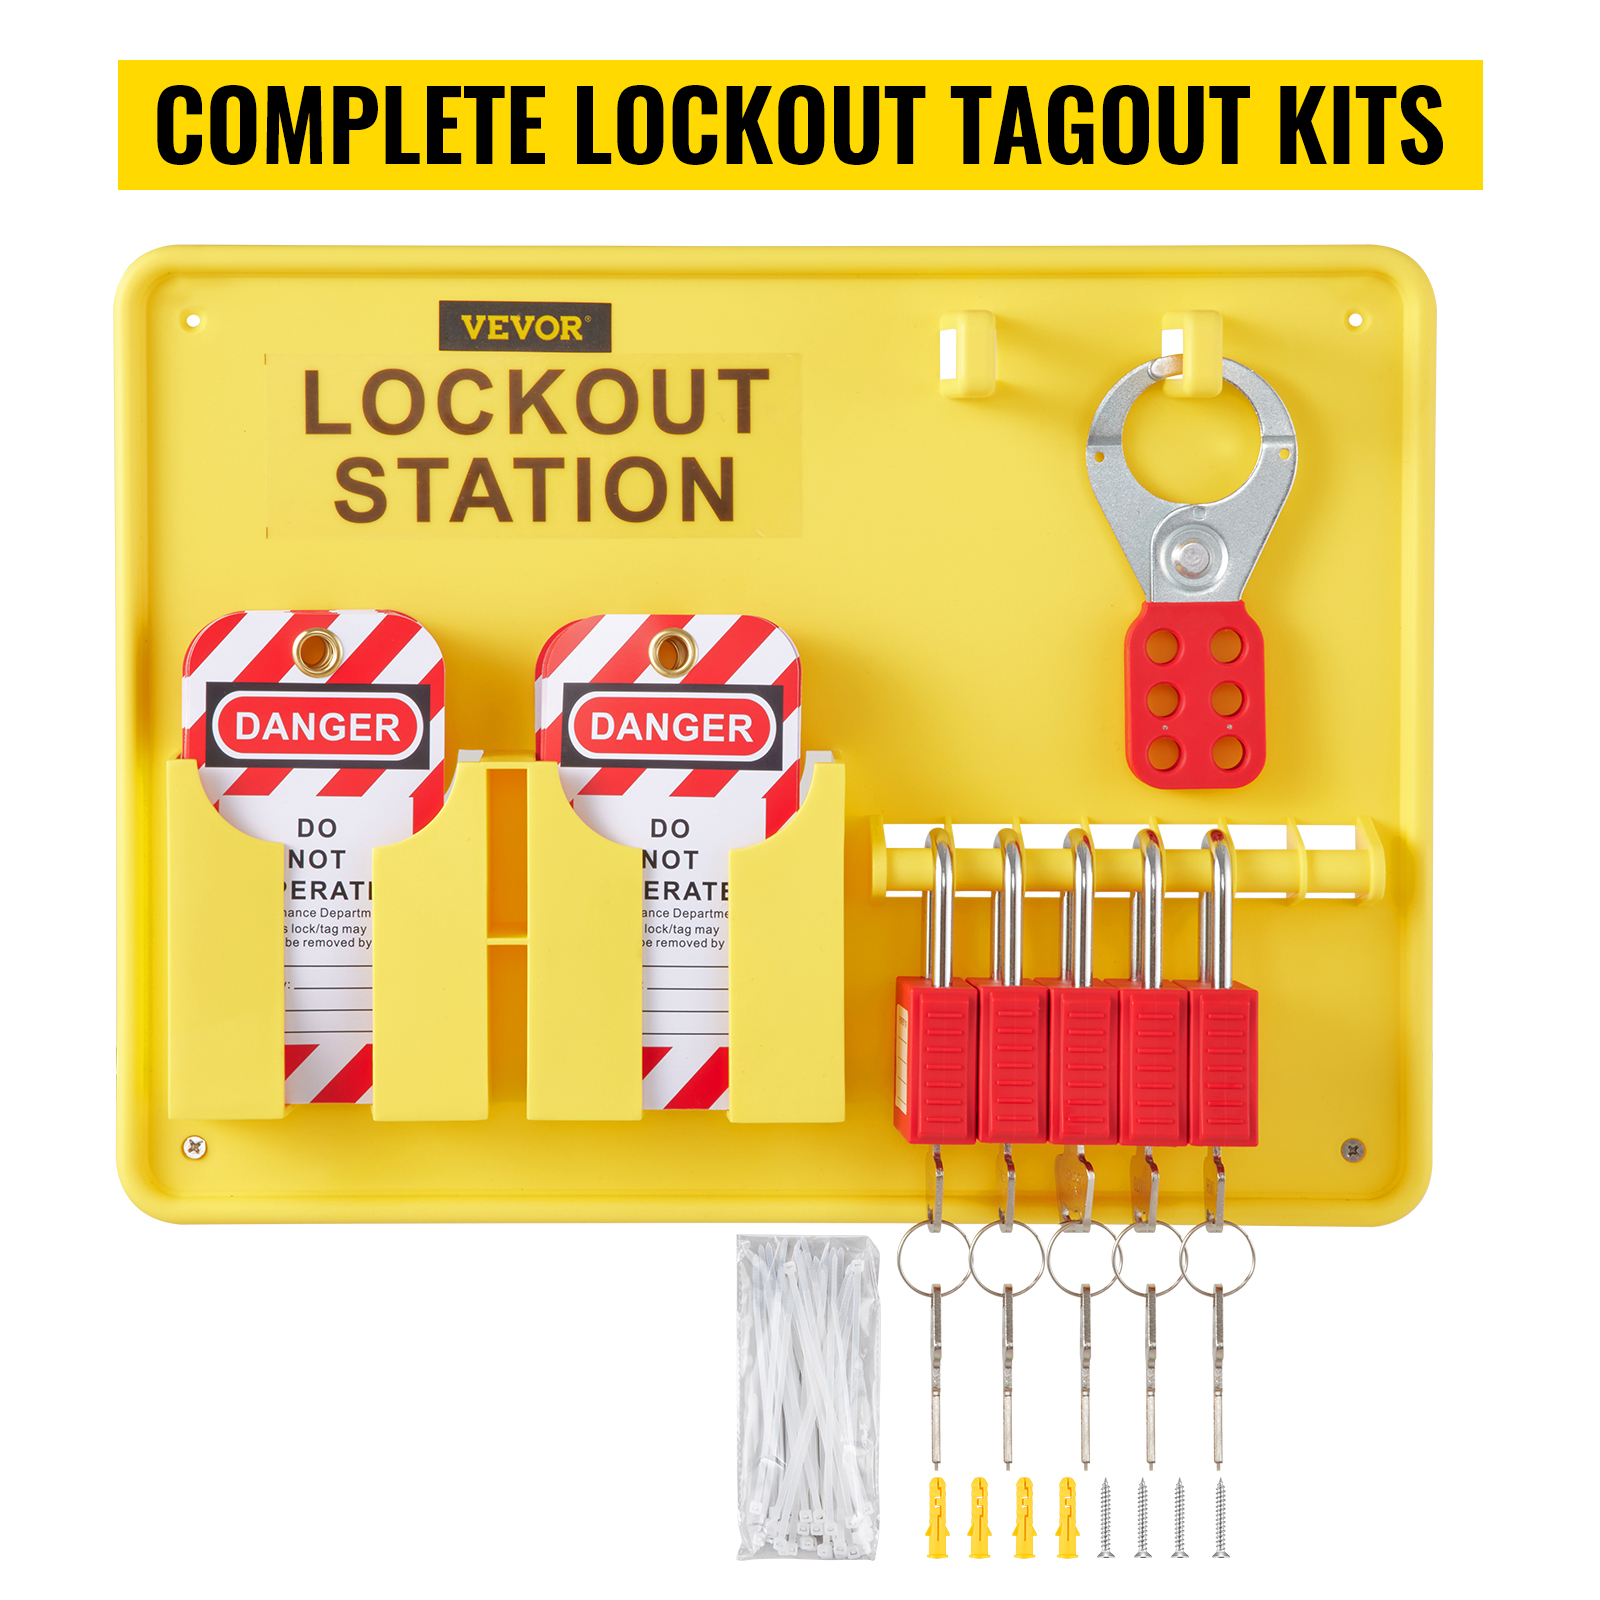 VEVOR 26 PCS Lockout Tagout Kits, Electrical Safety Loto Kit Includes  Padlocks, Lockout Station, Hasp, Tags & Zip Ties, Lockout Tagout Safety  Tools for Industrial, Electric Power, Machinery